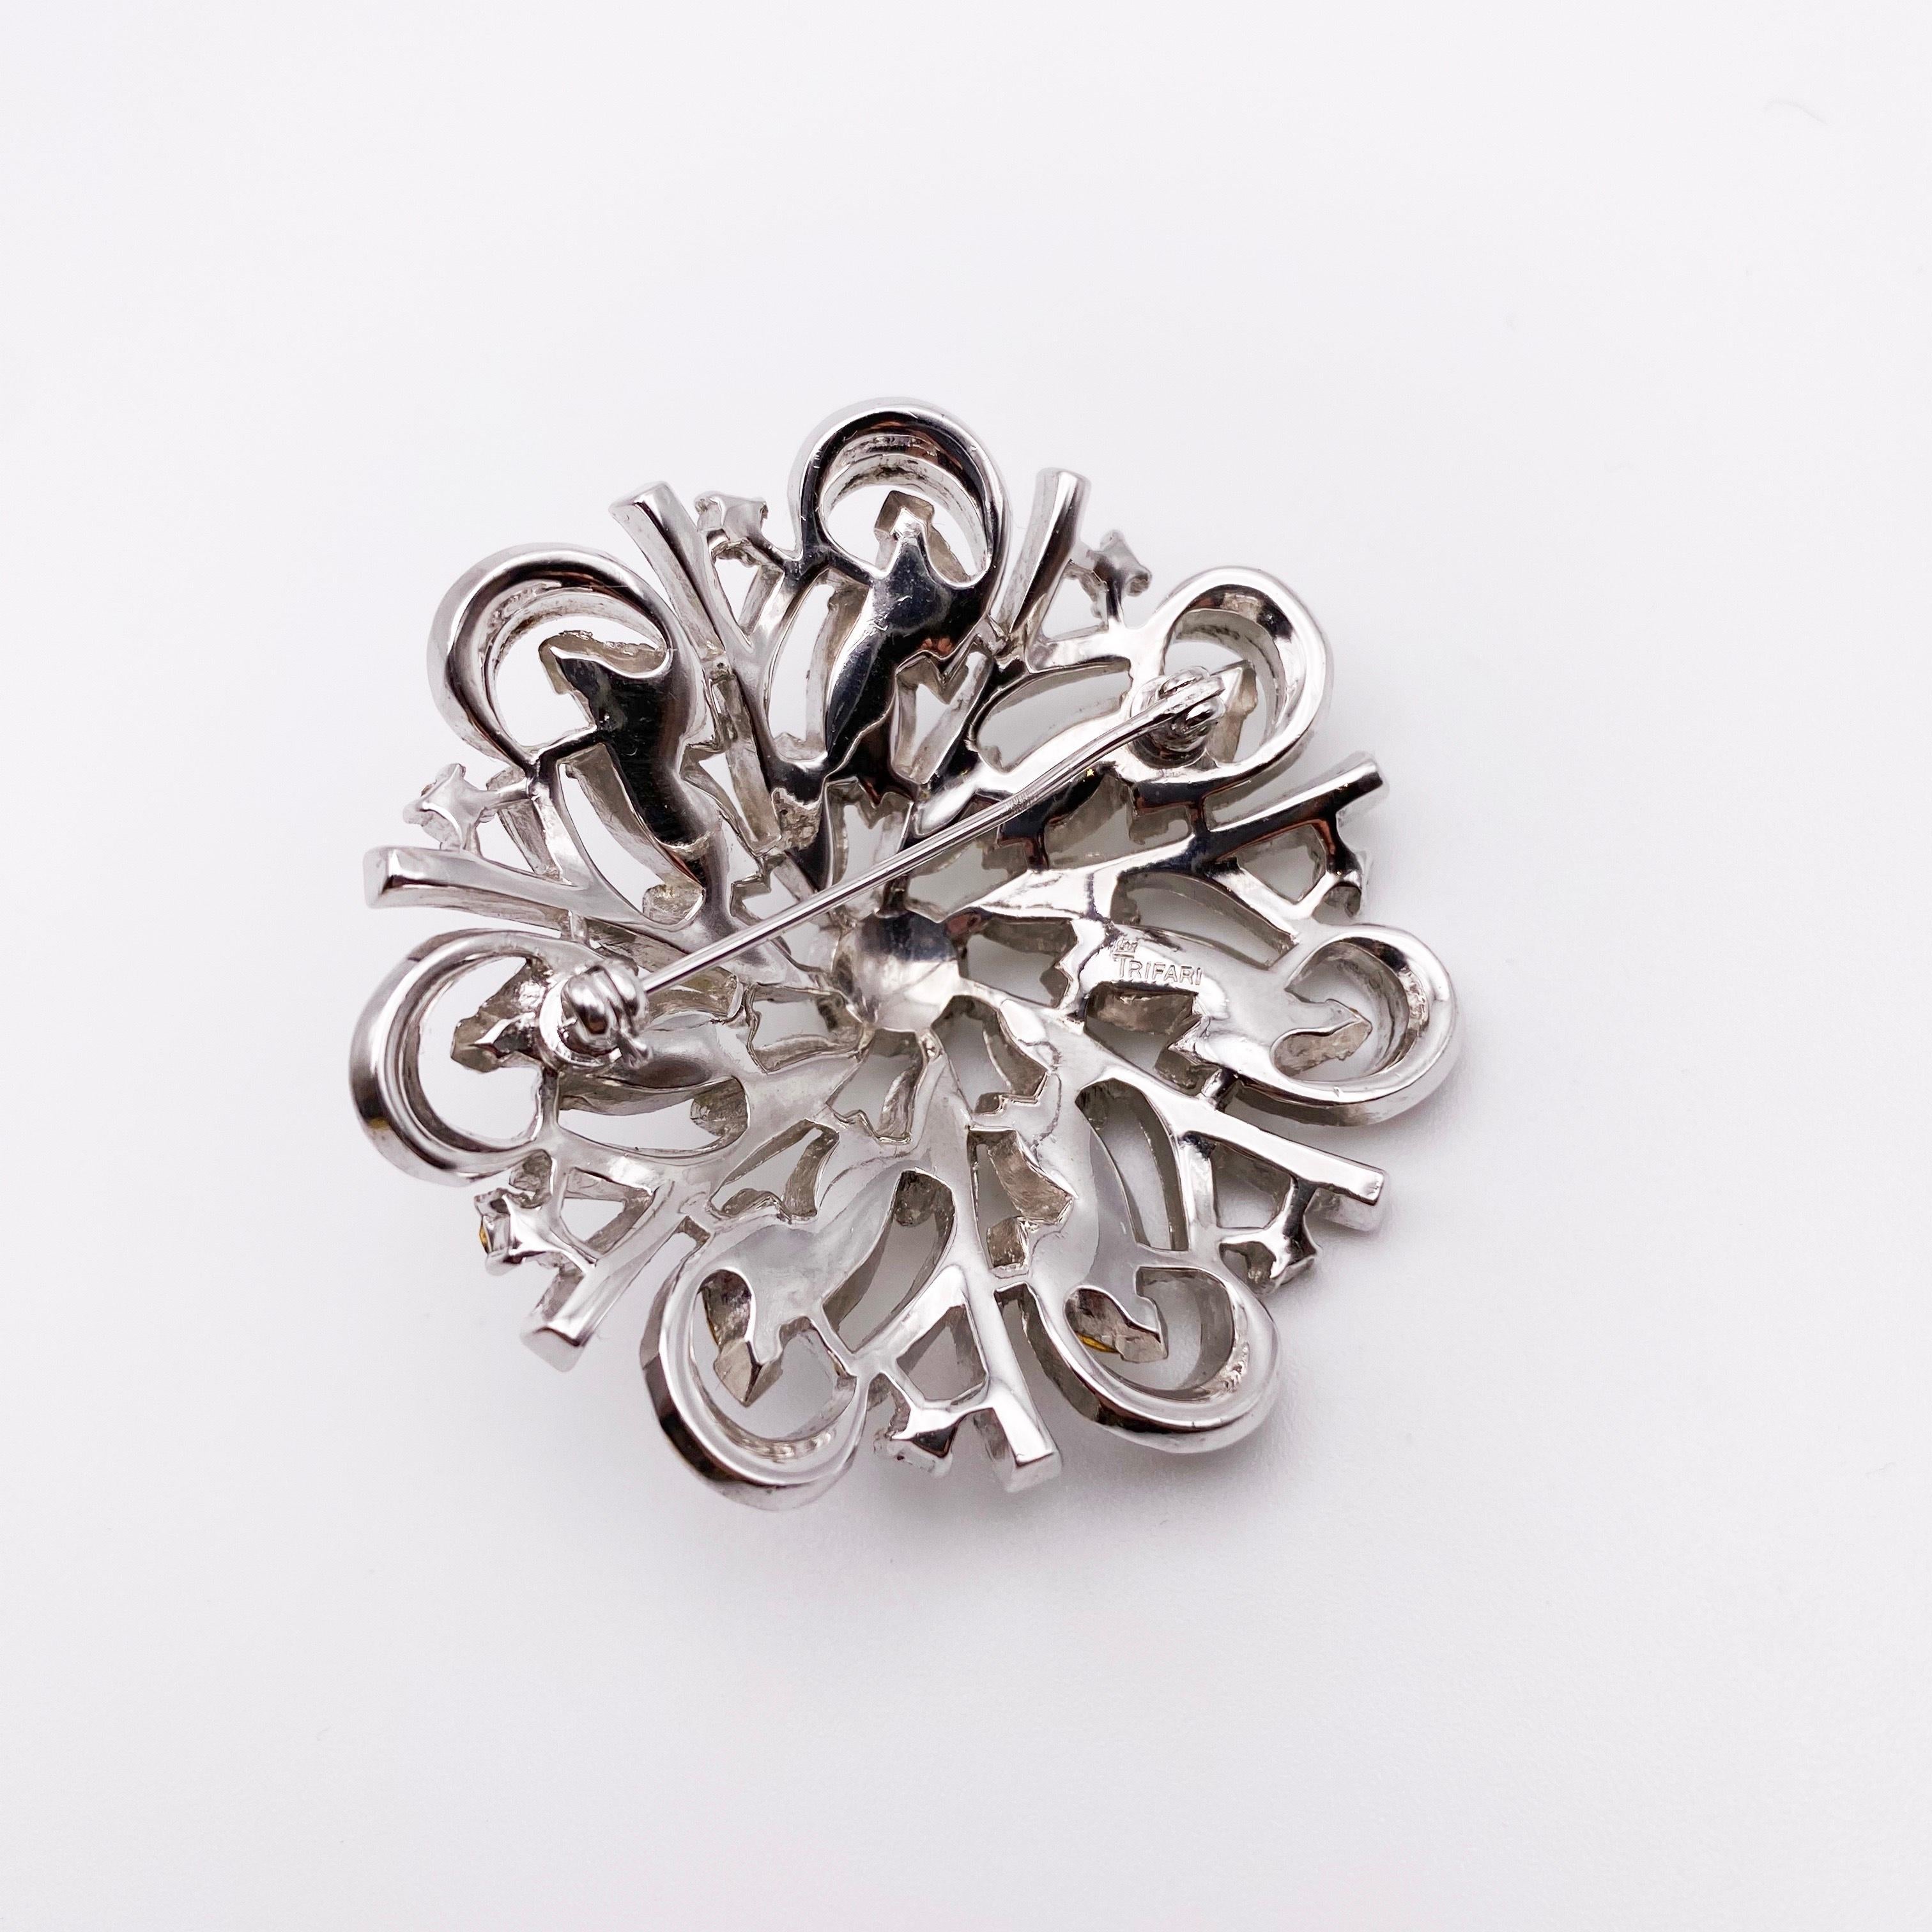 Circa, 1950s. A beautiful Alfred Phillipe Trifari crystal flower brooch. Featuring navette, baguette and pave' clear crystal rhinestones. Set in rhodium plating.  

Trifari's flowers are a collecting field in their own right. Generally, of more